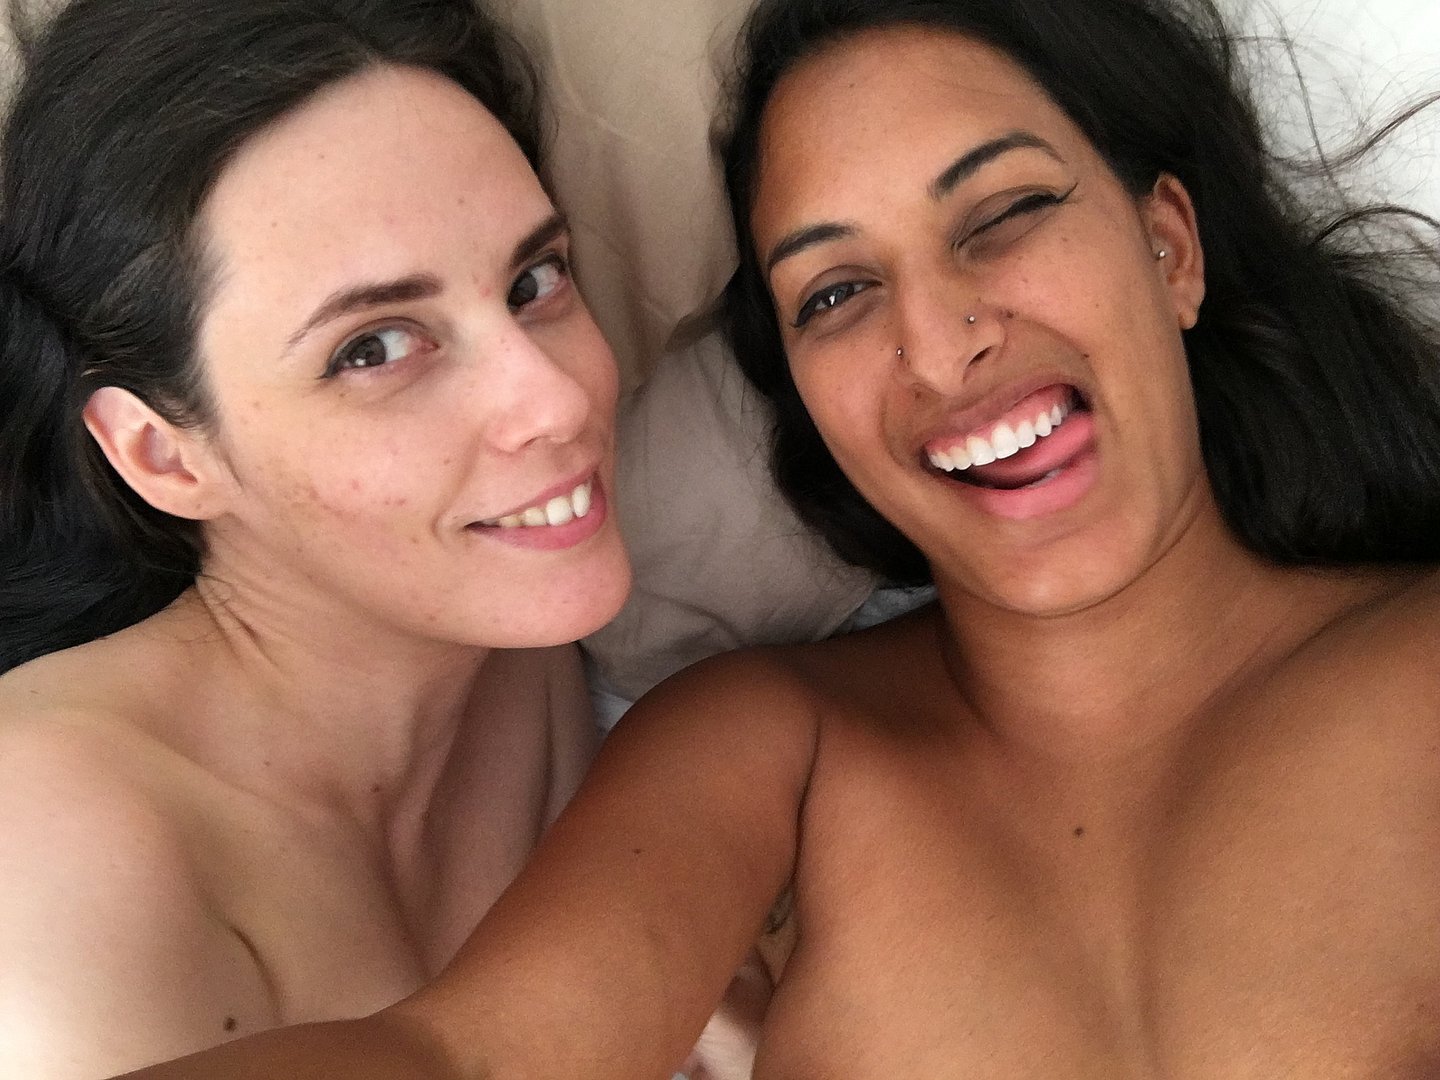 Kali Sudhra As Seen On Ersties [intimate Moments With Anneke & Kali]